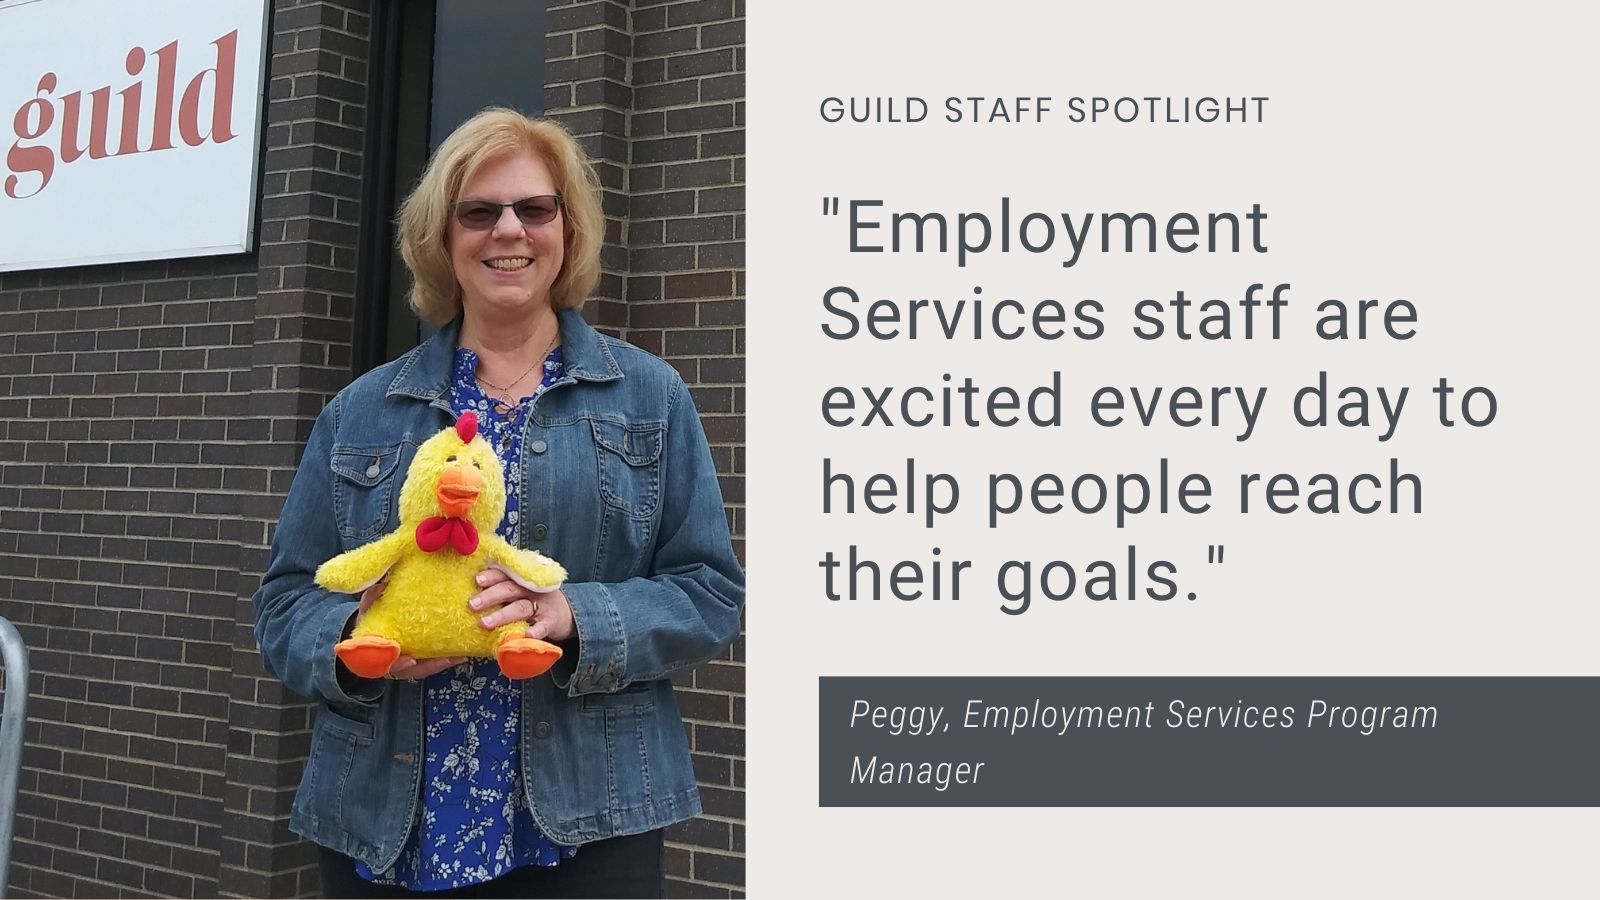 Text reading "Employment Services staff are excited every day to help people reach their goals."